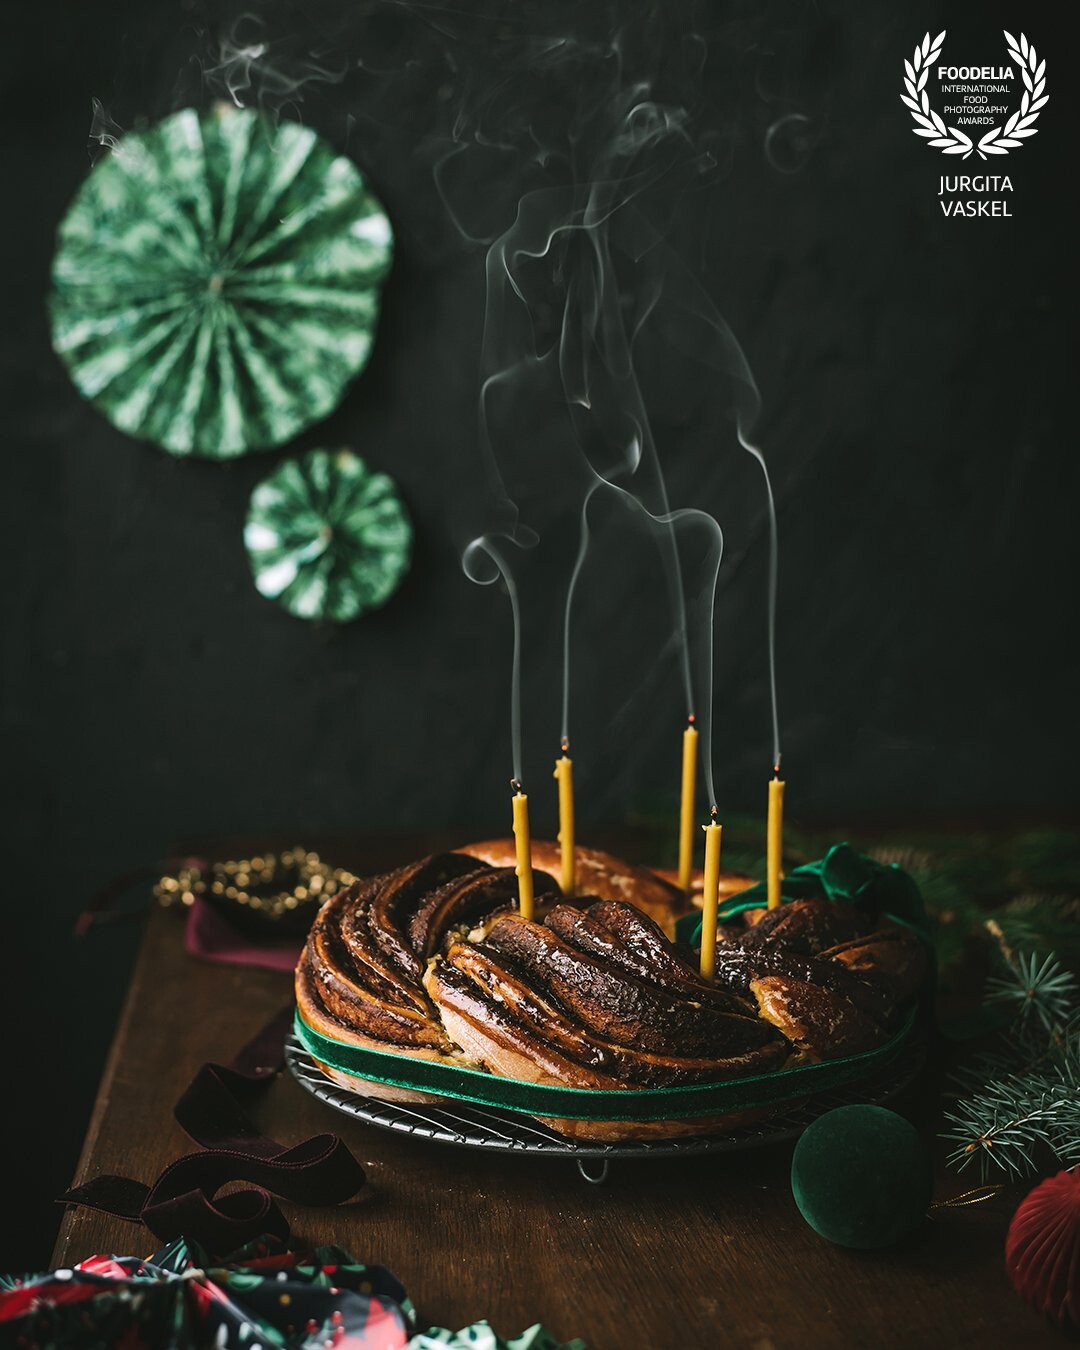 I would call this picture "Still life with chocolate Christmas wreath and magical swirls of smoke". Smoke adds depth to the shot, as well as life and energy.